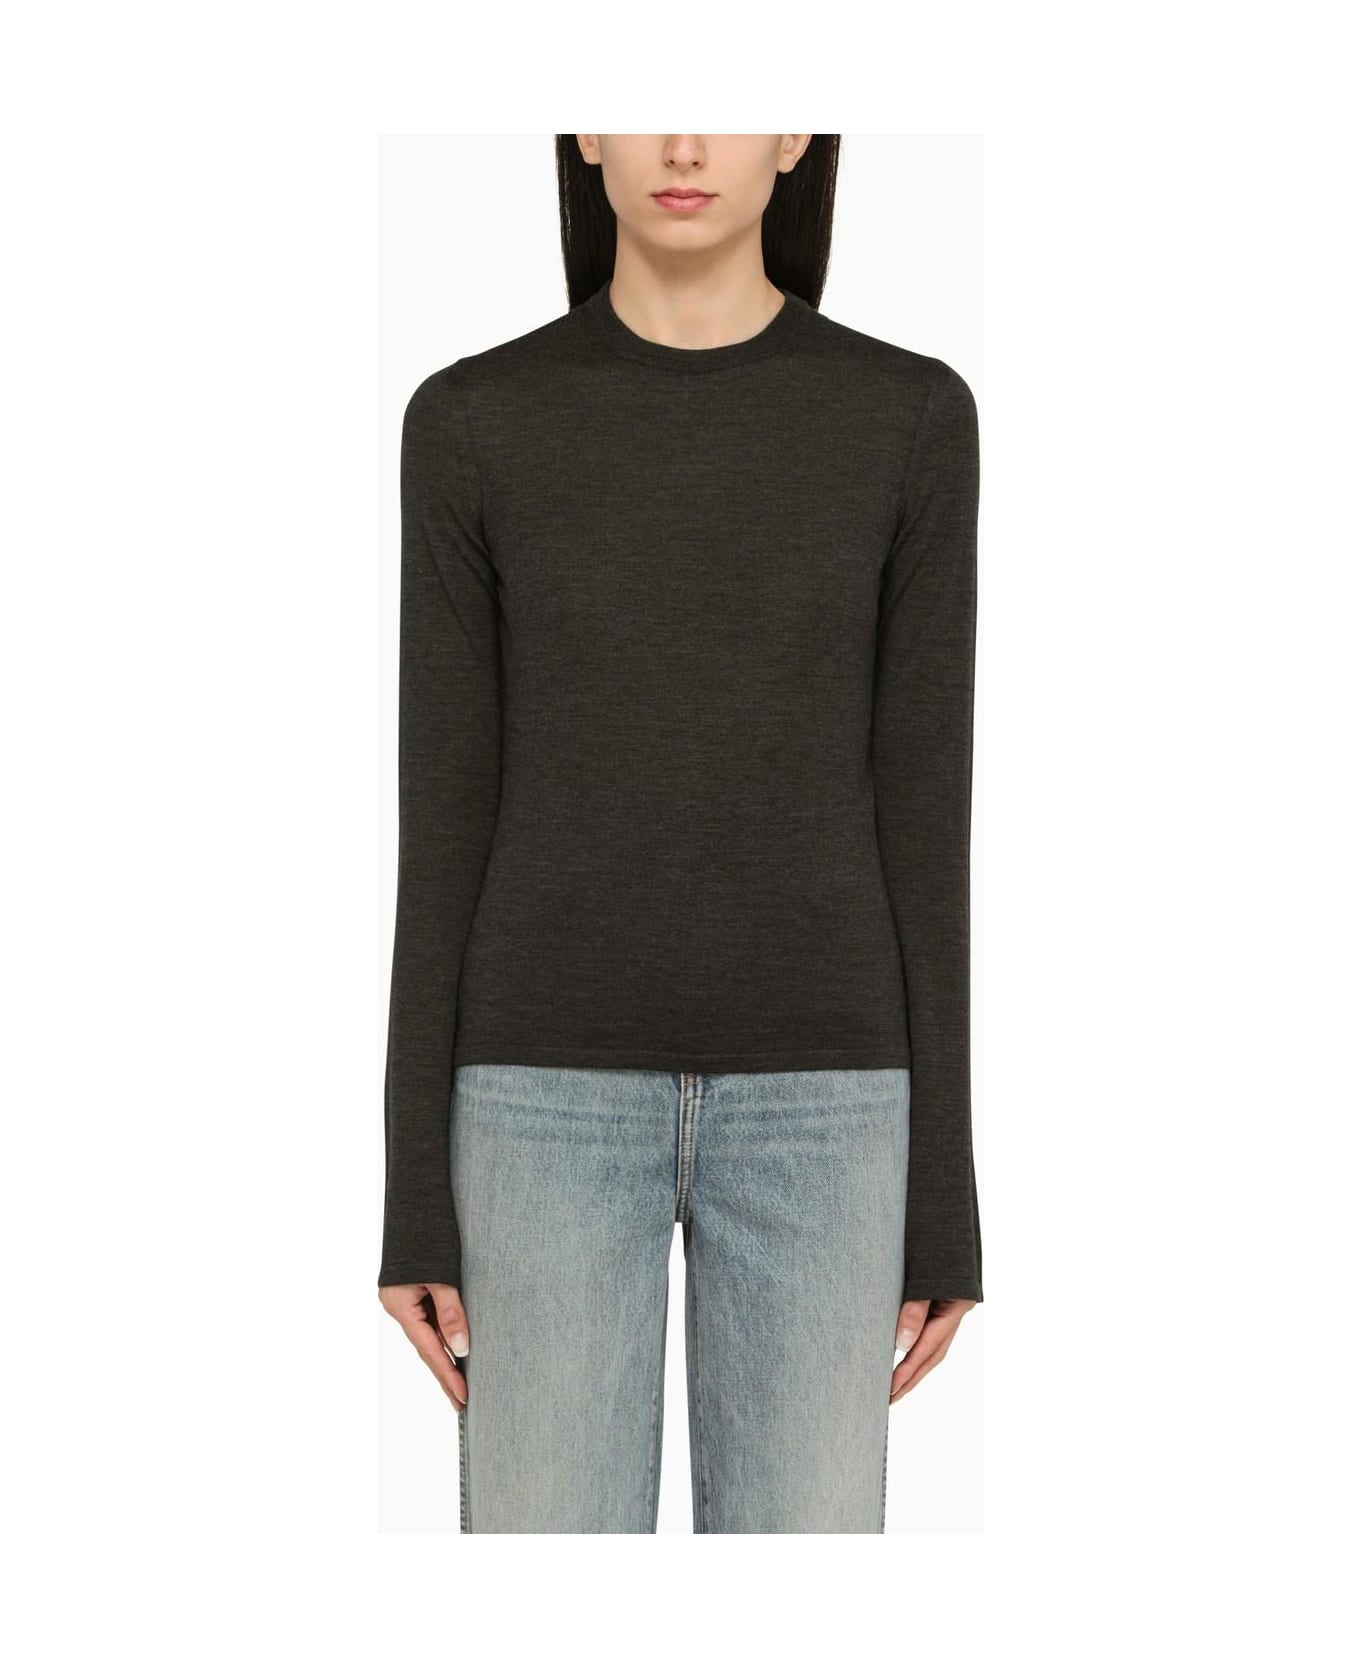 Saint Laurent Sweater In Cashmere, Wool And Silk - ANTRACITE